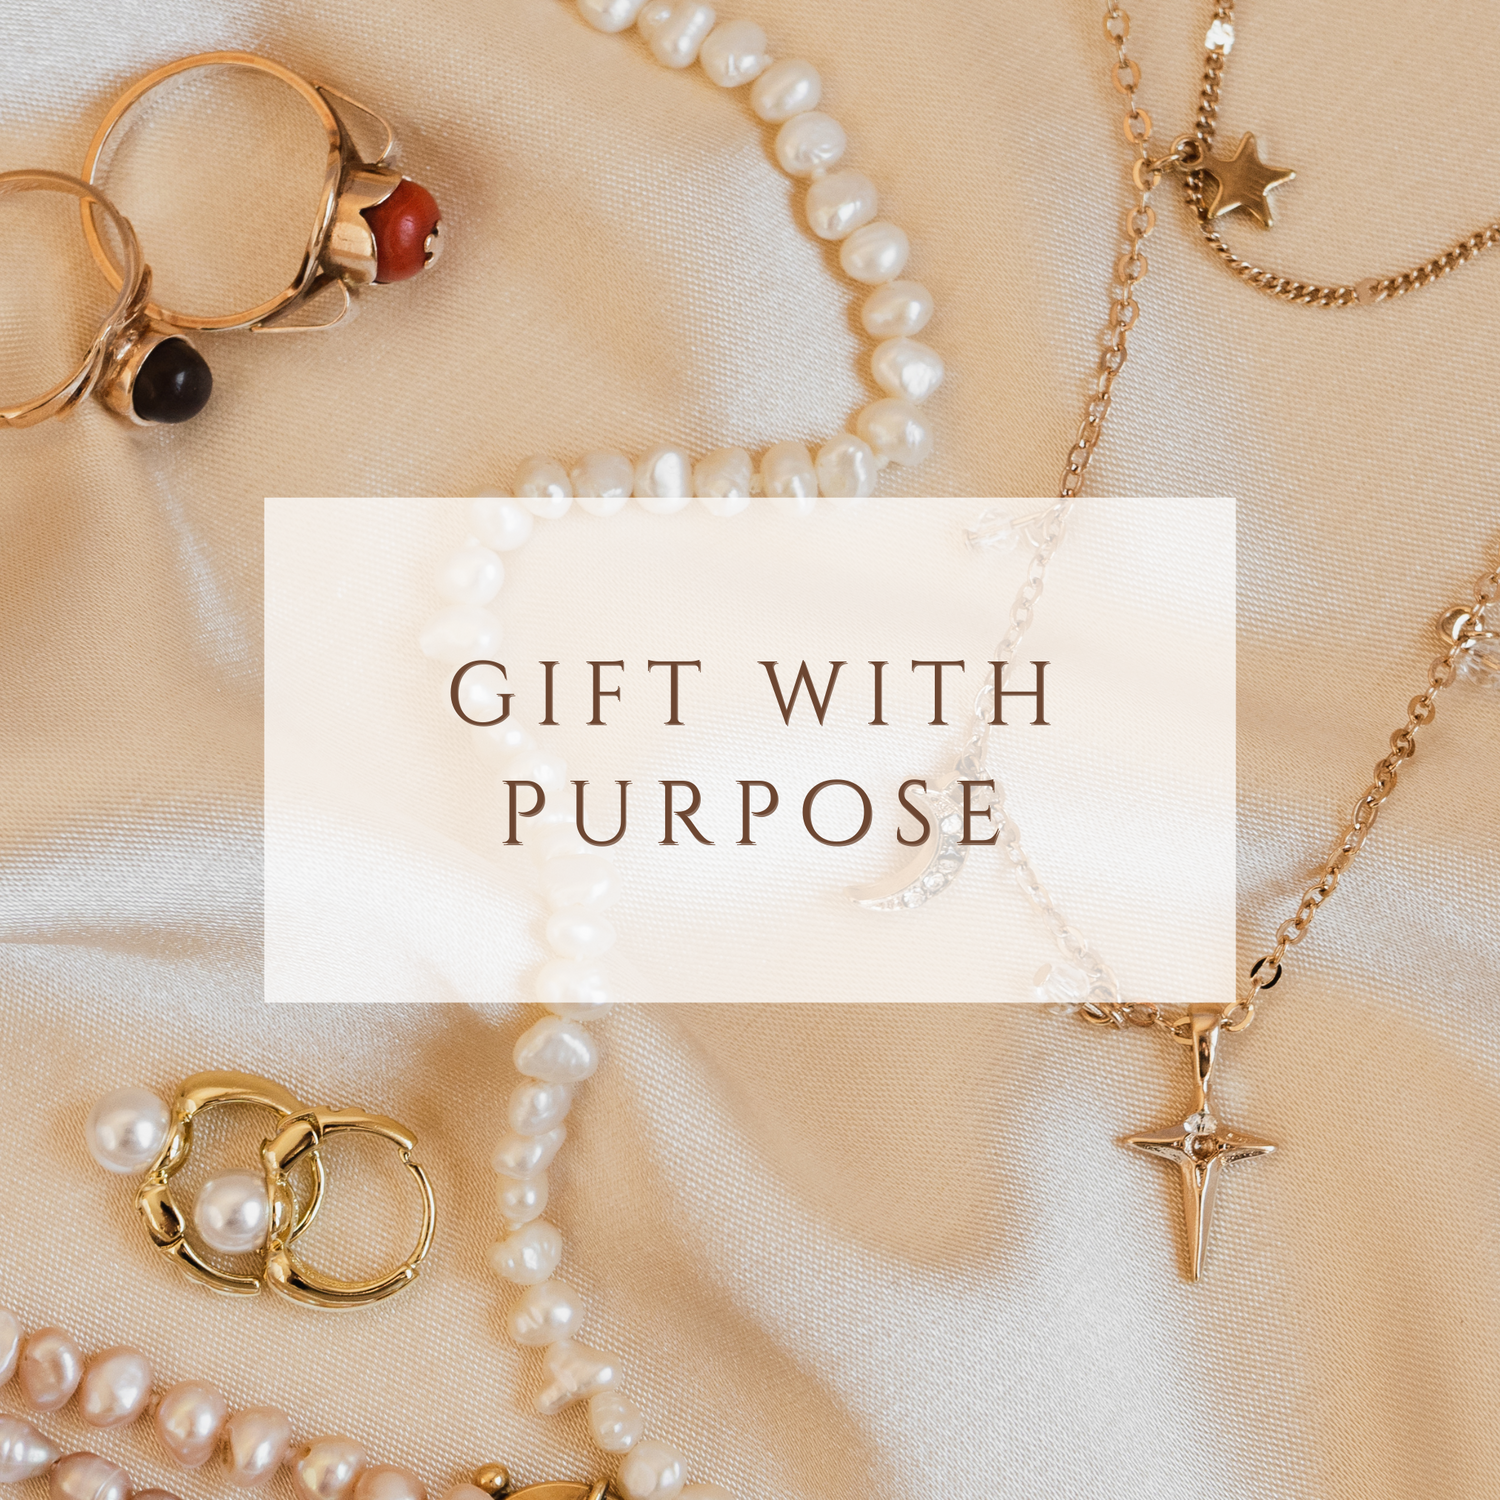 Gift with purpose gold jewelry